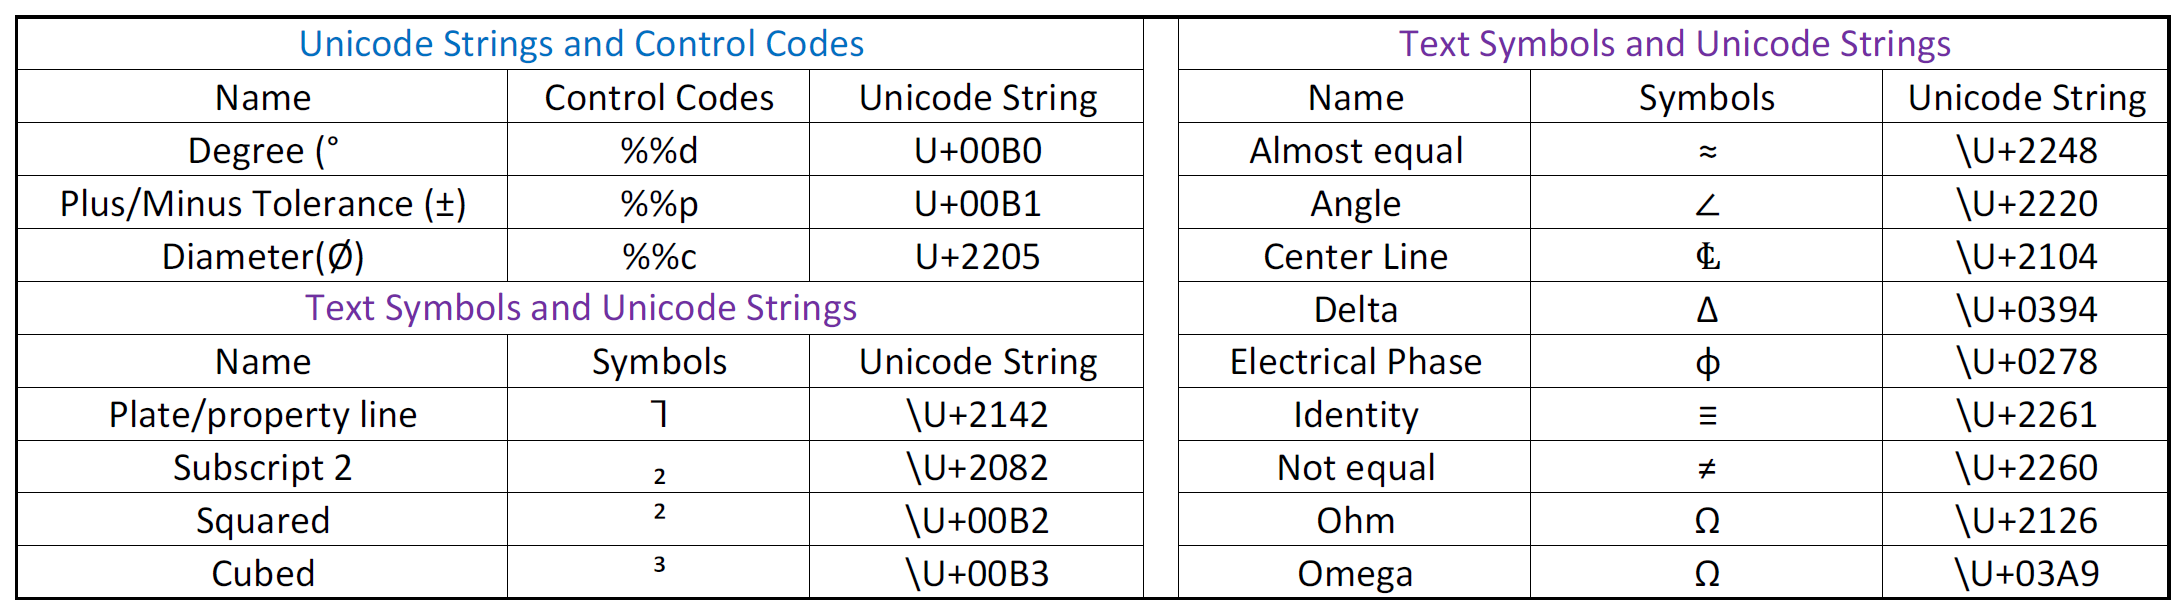 Unicode Strings and Text Symbols